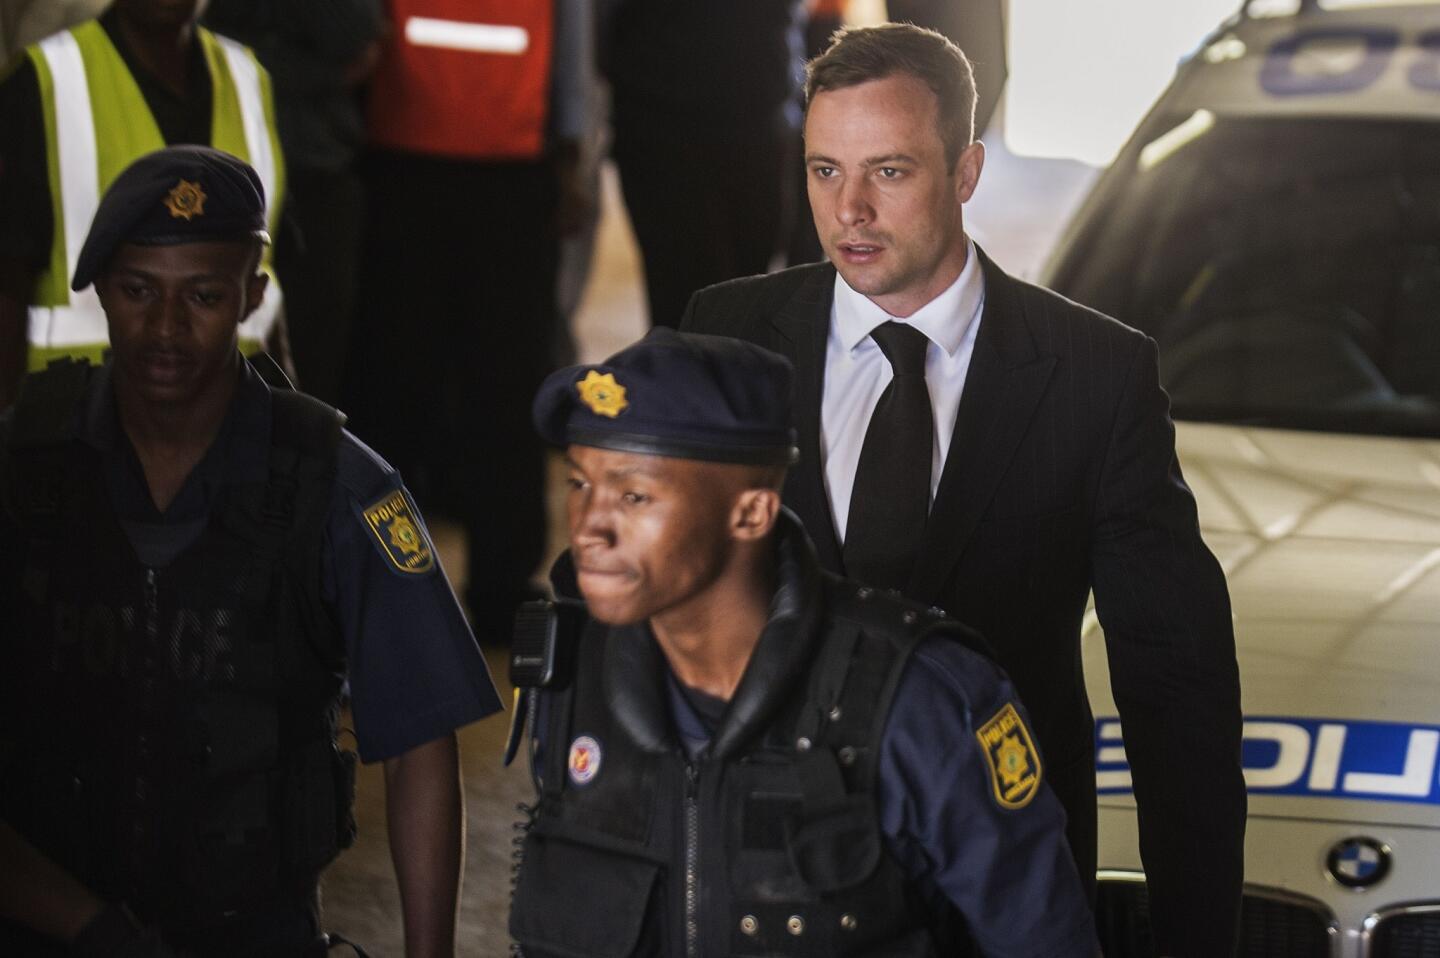 Oscar Pistorius is escorted to a police vehicle to be transported to prison after being sentenced to five years for the negligent killing of his girlfriend Reeva Steenkamp in 2013.